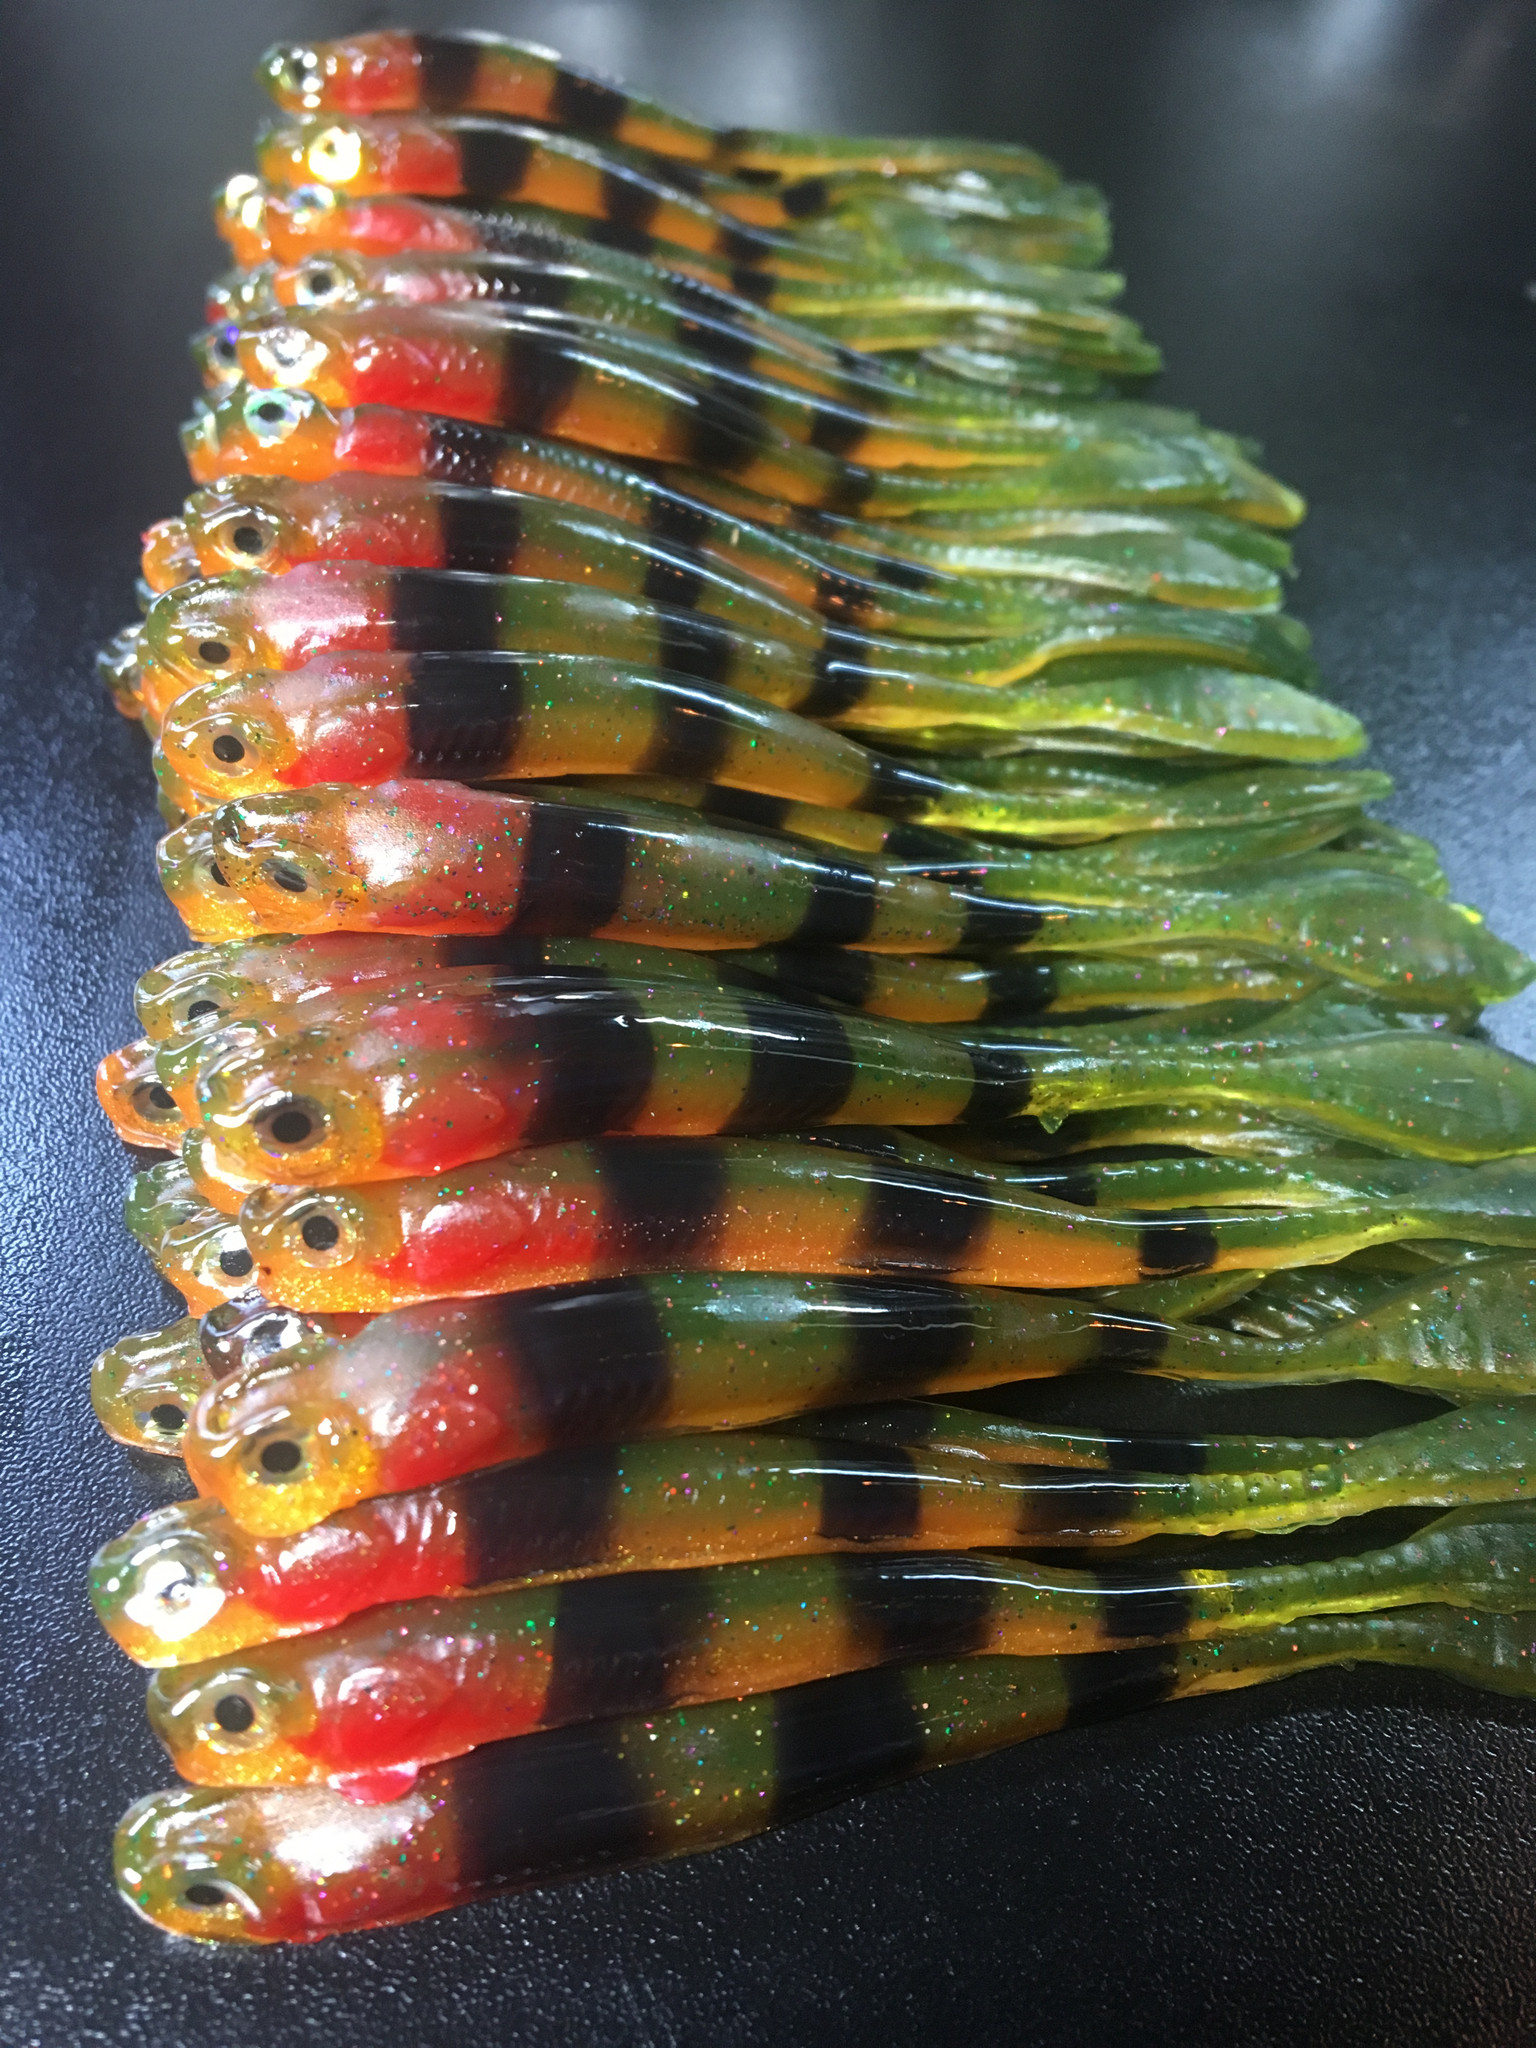 *Limited Run* 3.5 Drop Shot Minnow Color: Bright Perch 30 count pack (Pre  Order 2-3 Weeks)